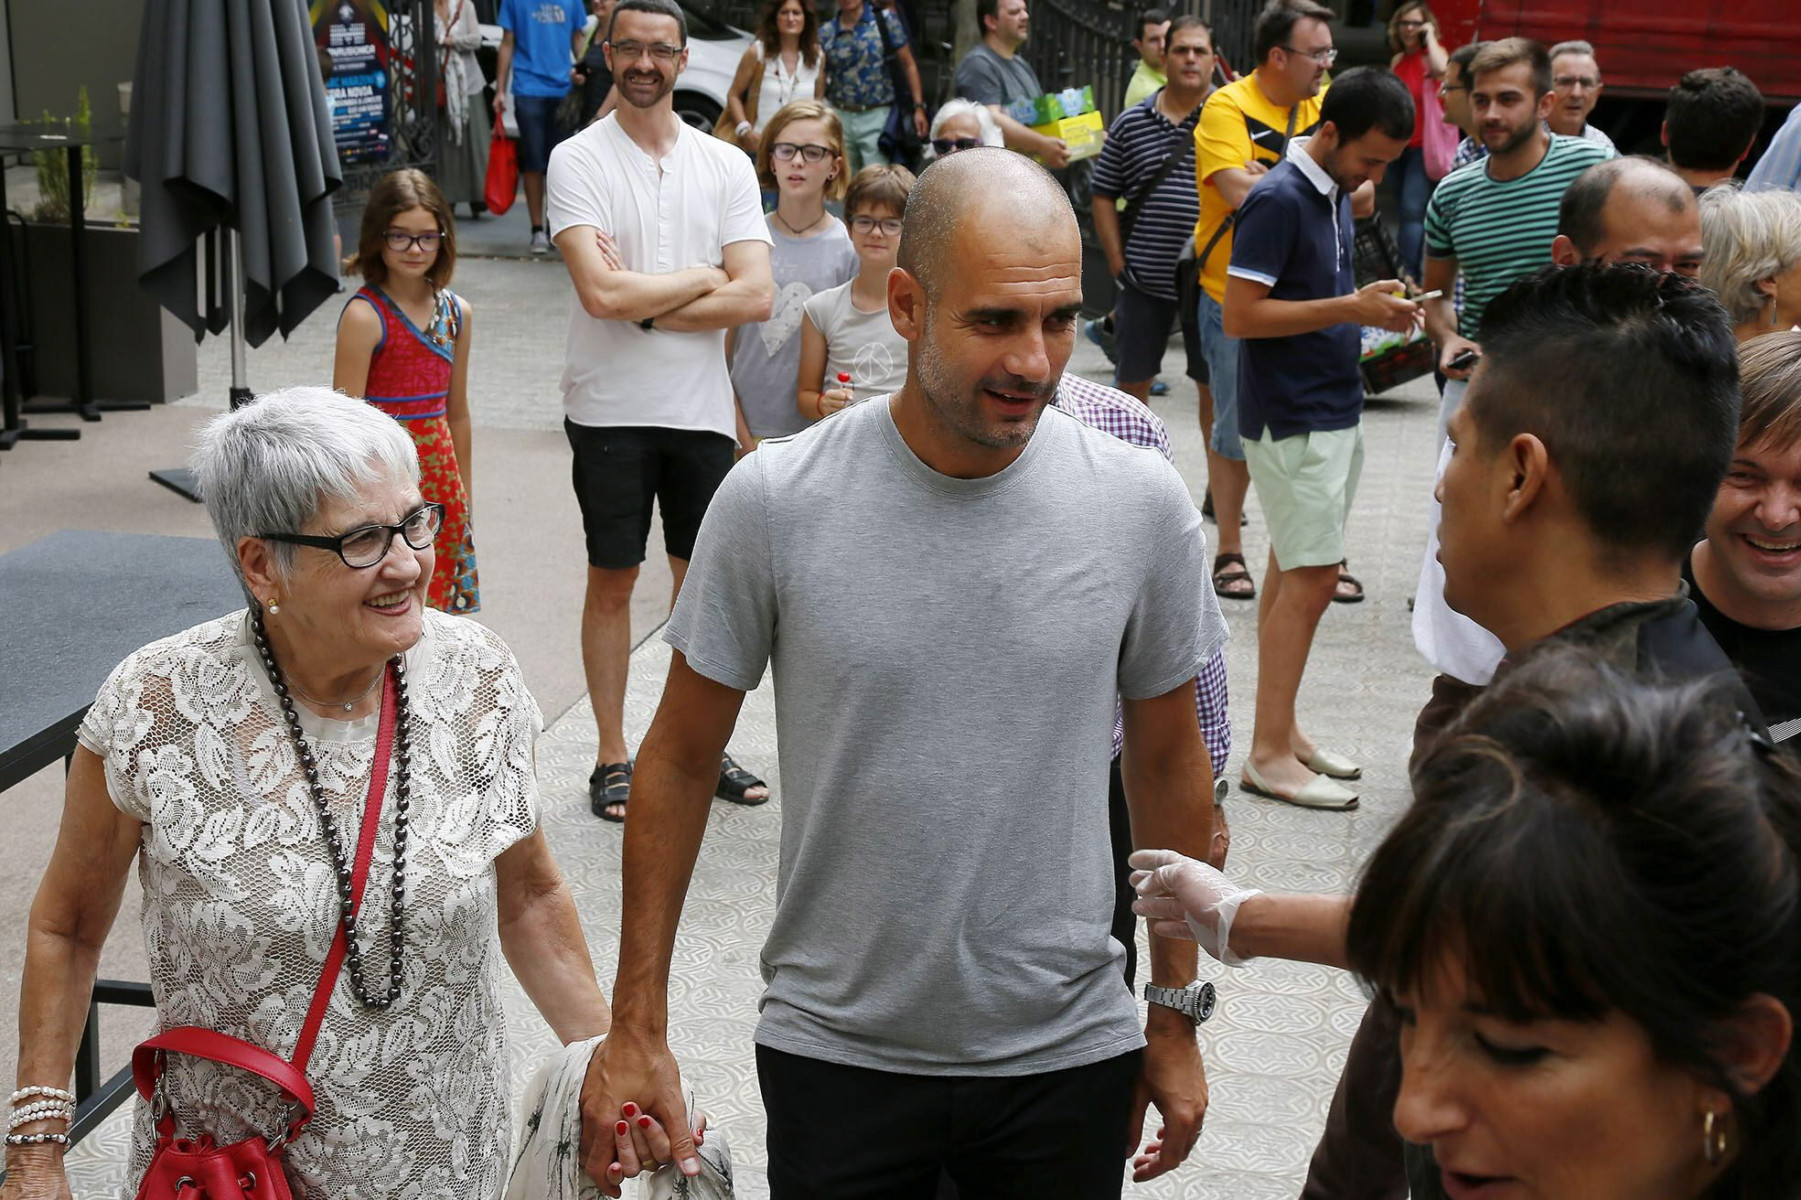 Guardiola's mother Dolors Sala Carrio died on Monday aged 82 after contracting coronavirus